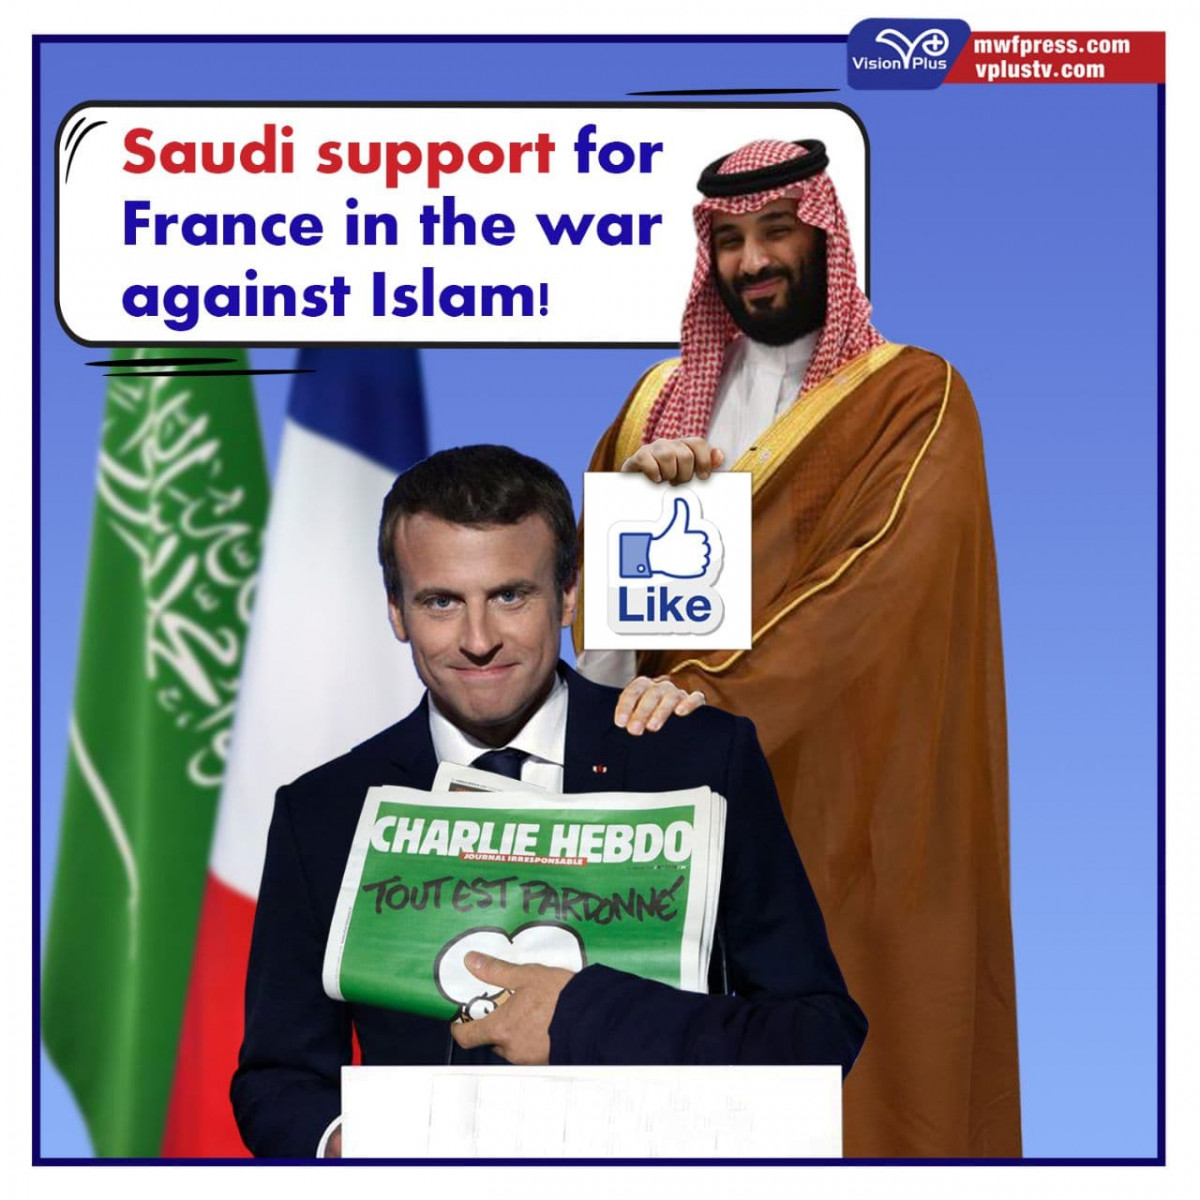 Saudi support for France in the war against Islam